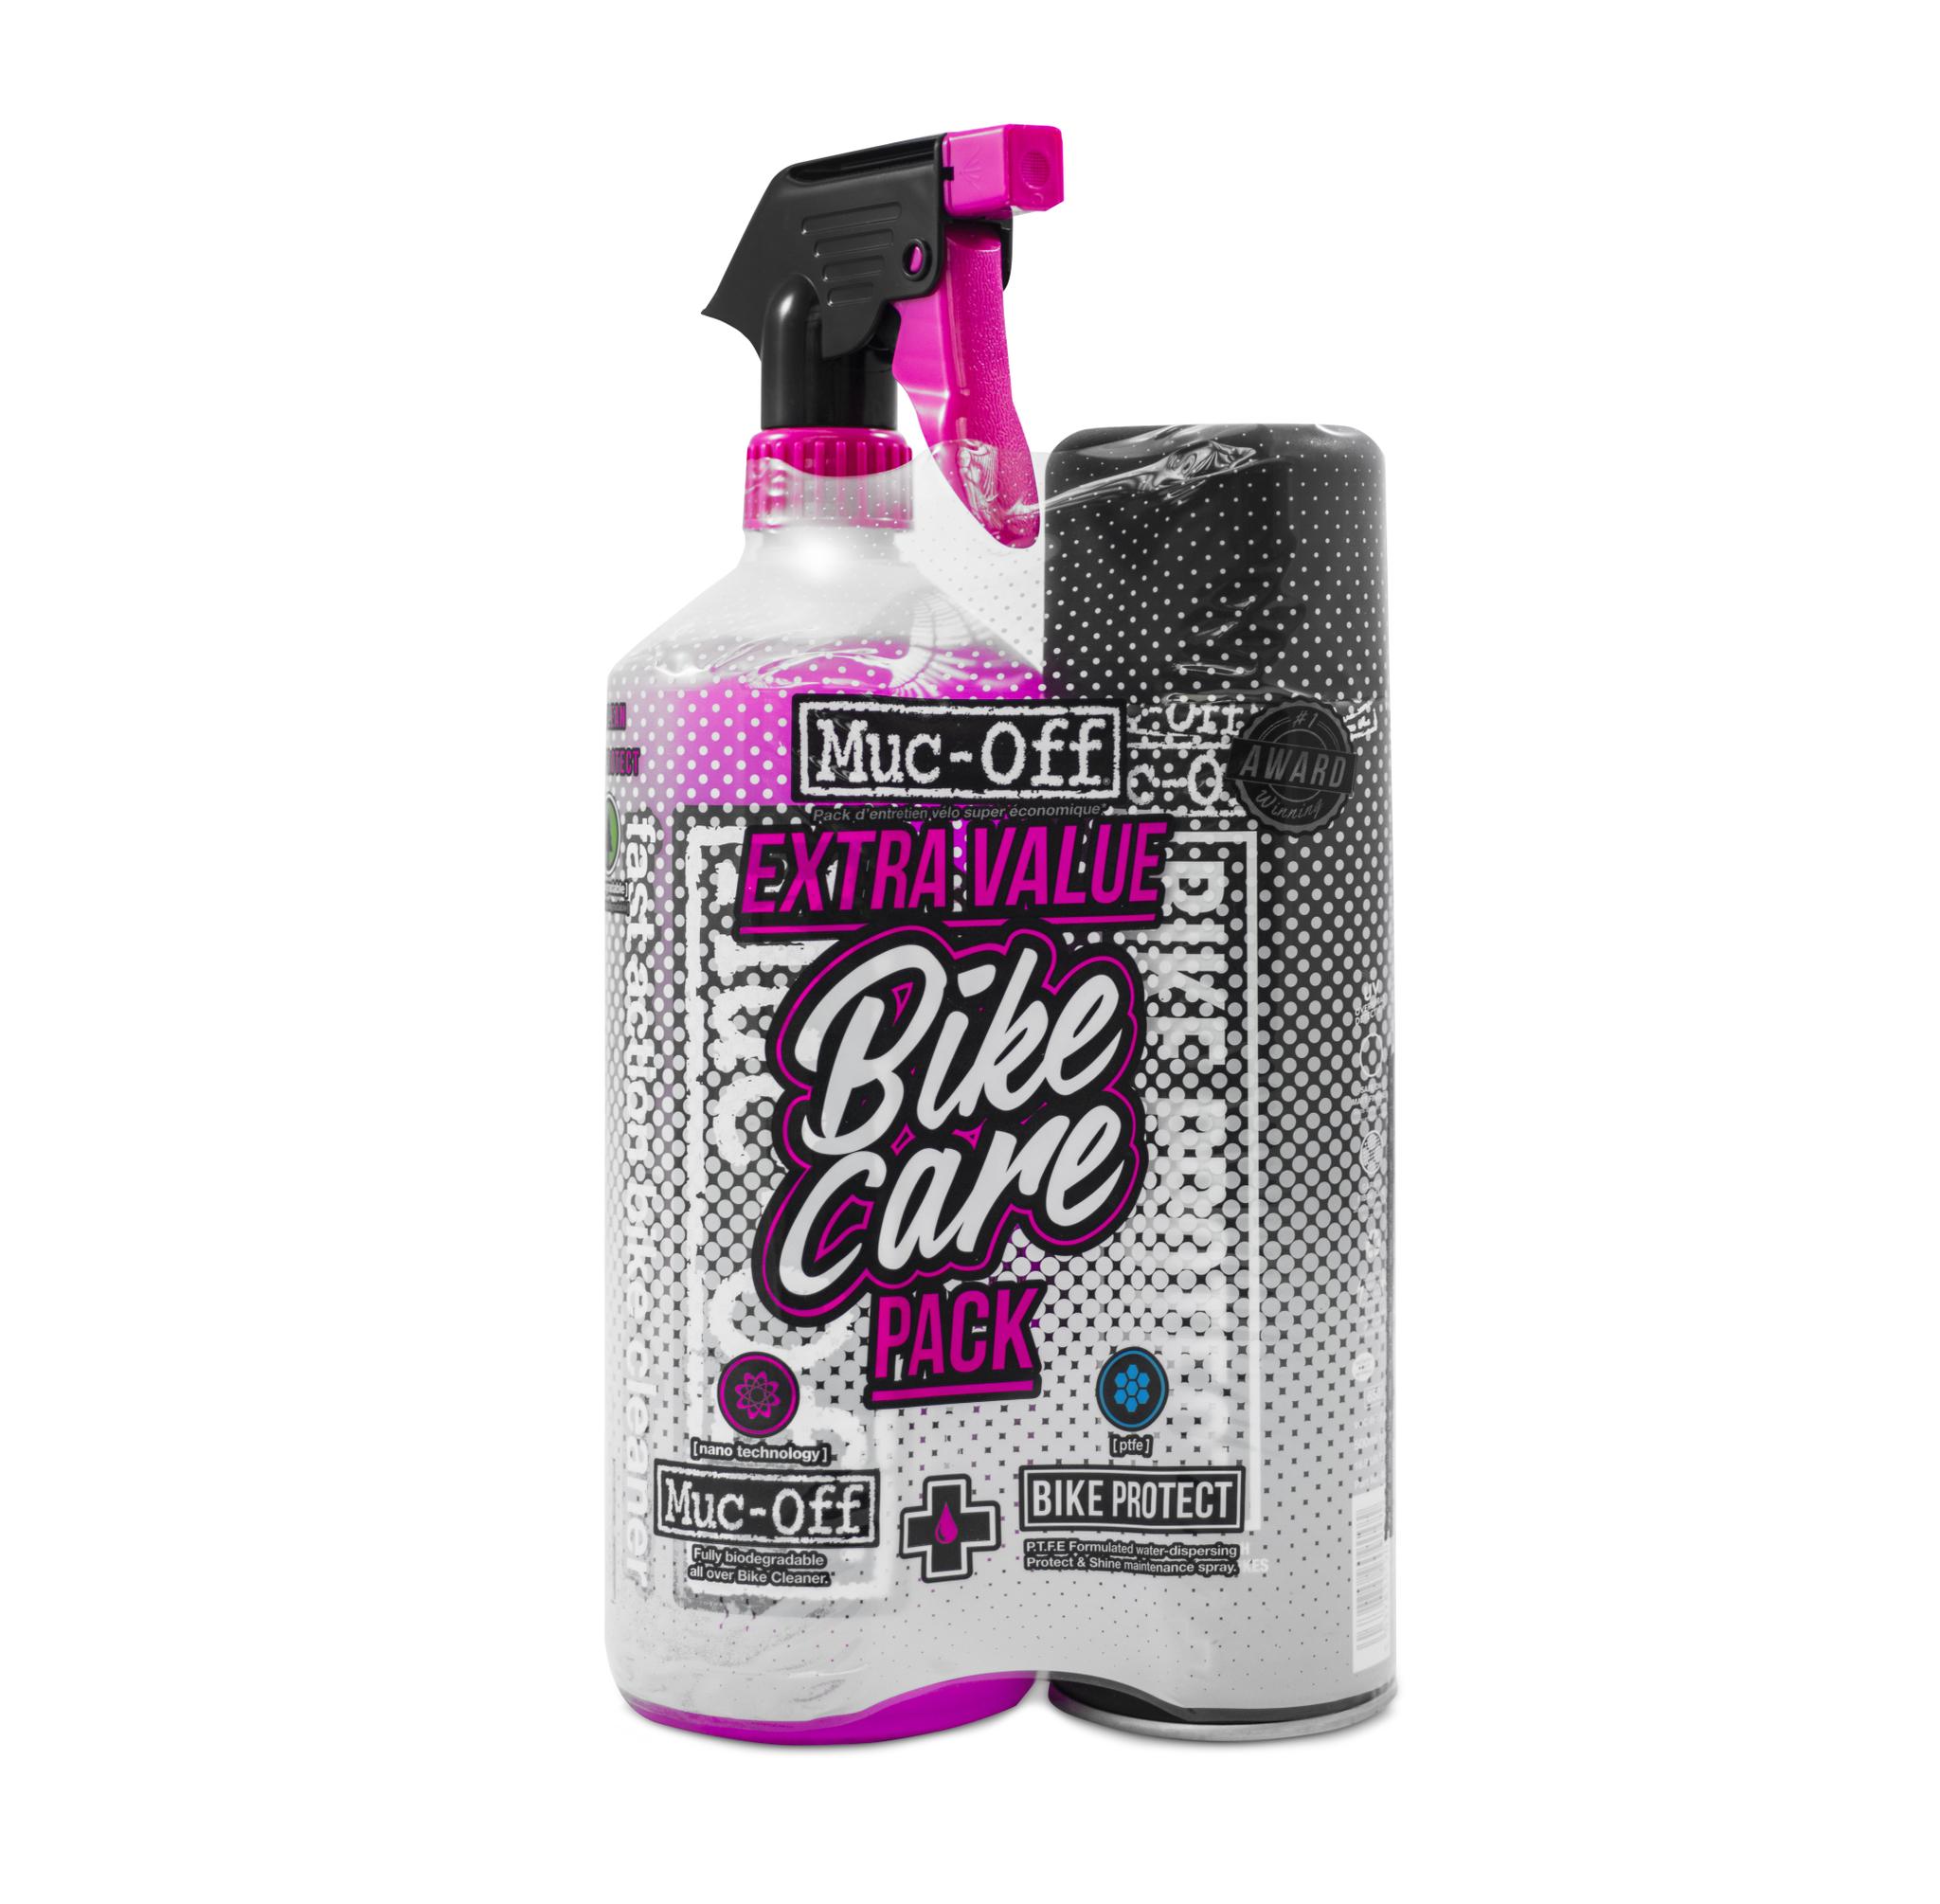 Muc-off Duo Pack Xtra Value Bike Care Pack  Pink/transparent